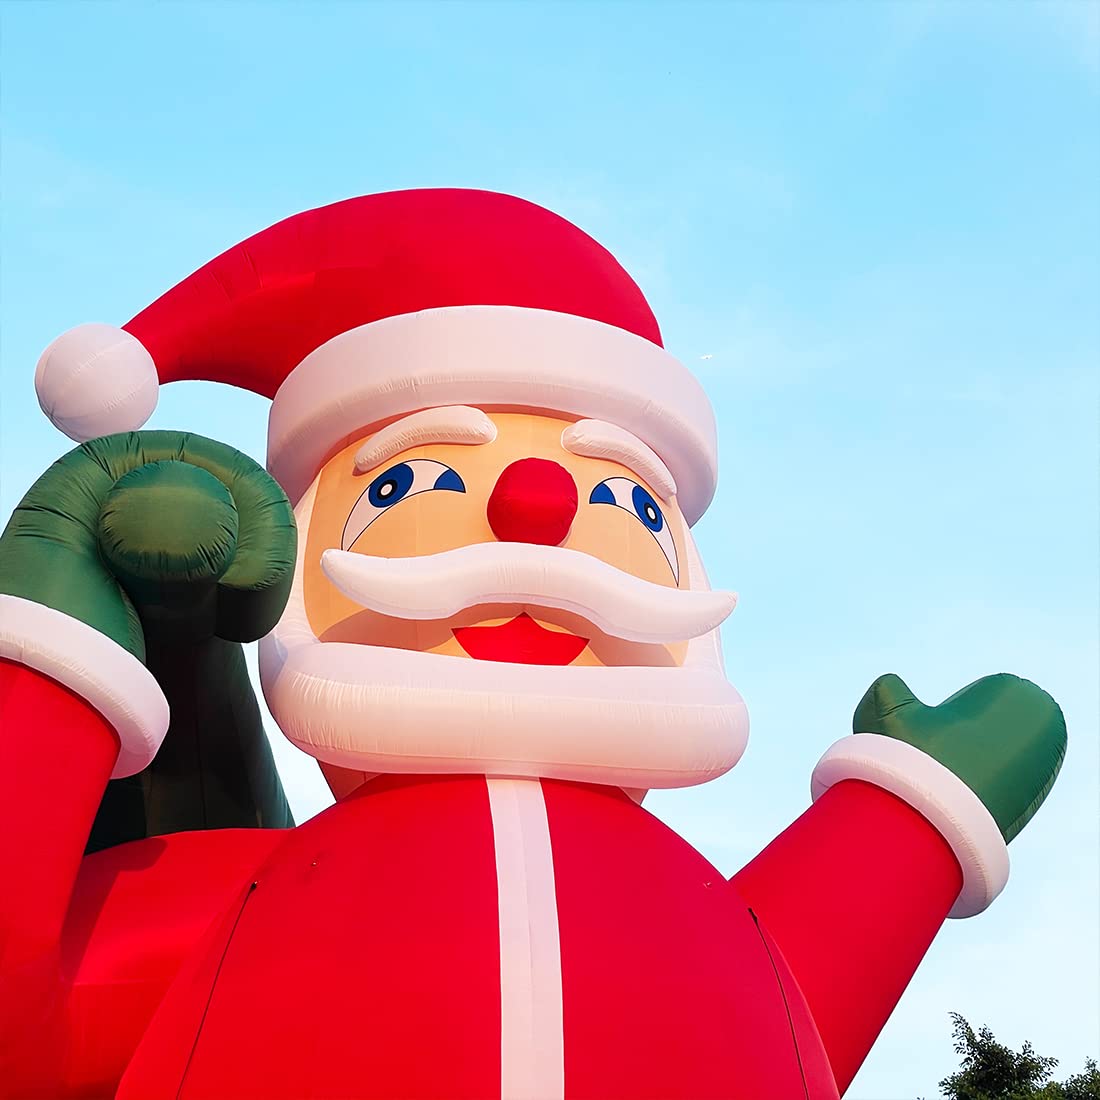 Giant 33Ft Premium Inflatable Santa Claus with Blower for Christmas Yard Decoration Outdoor Yard Lawn Xmas Party Blow Up Decoration with No Light